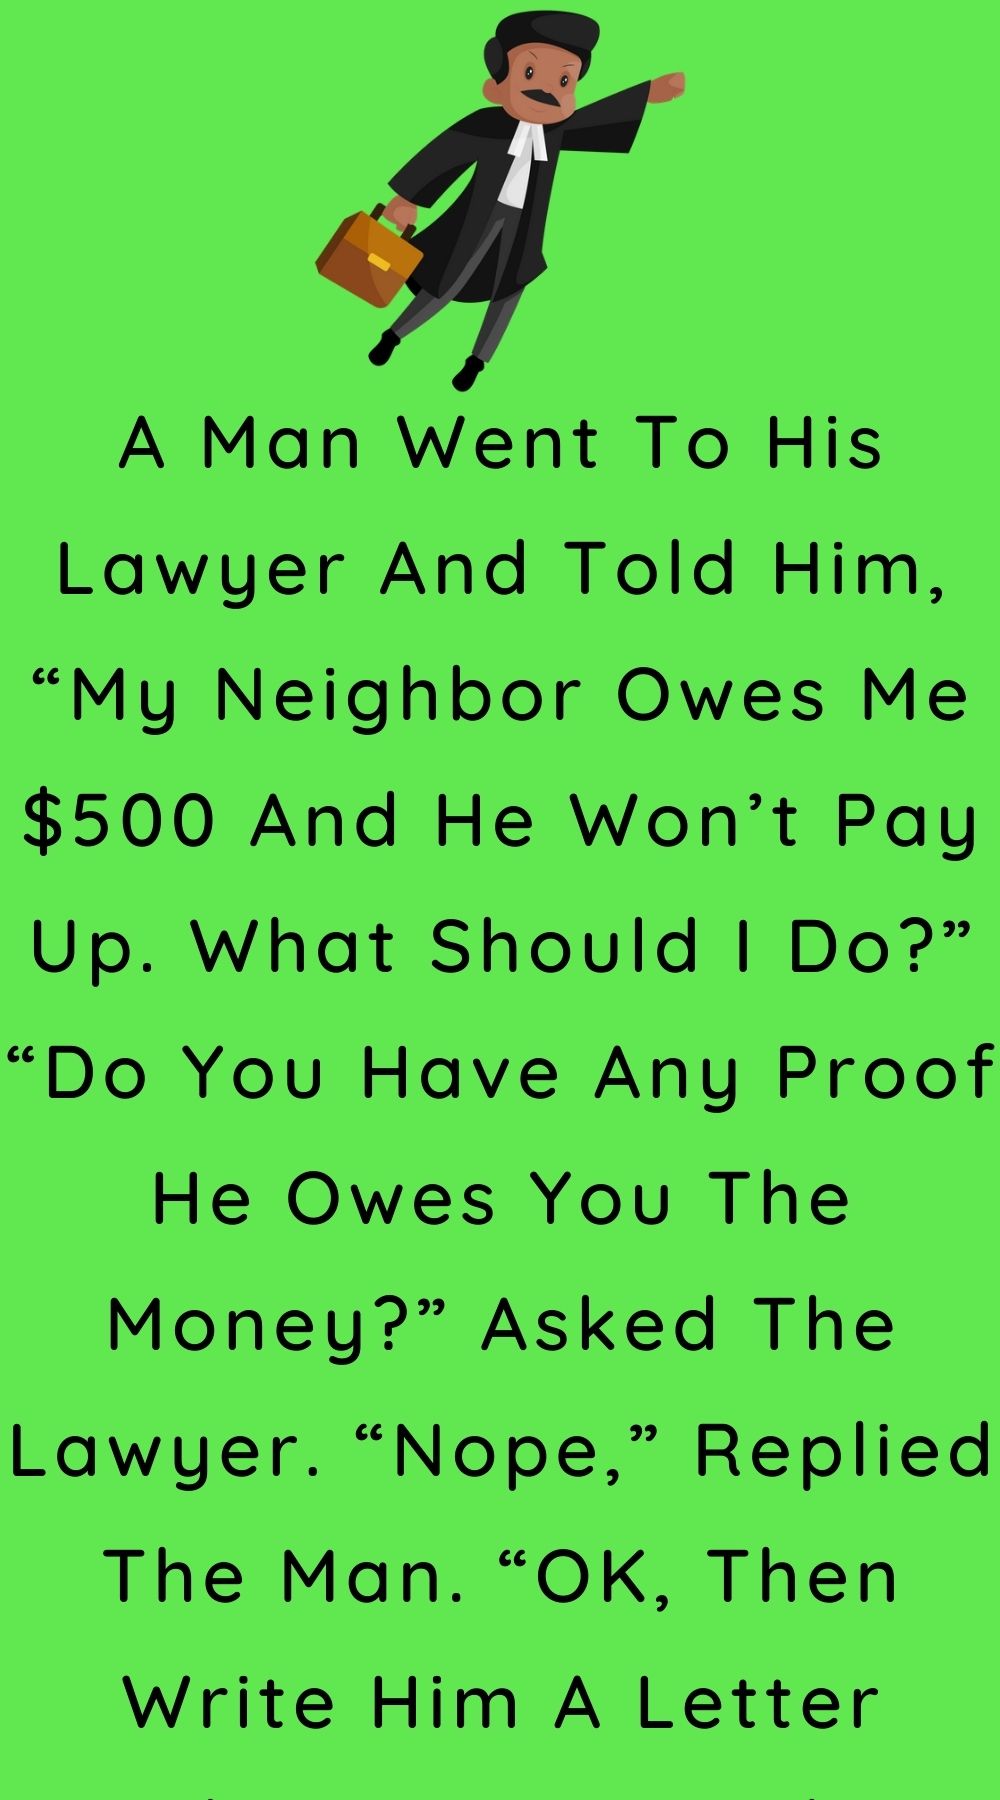 A Man Went To His Lawyer And Told Him